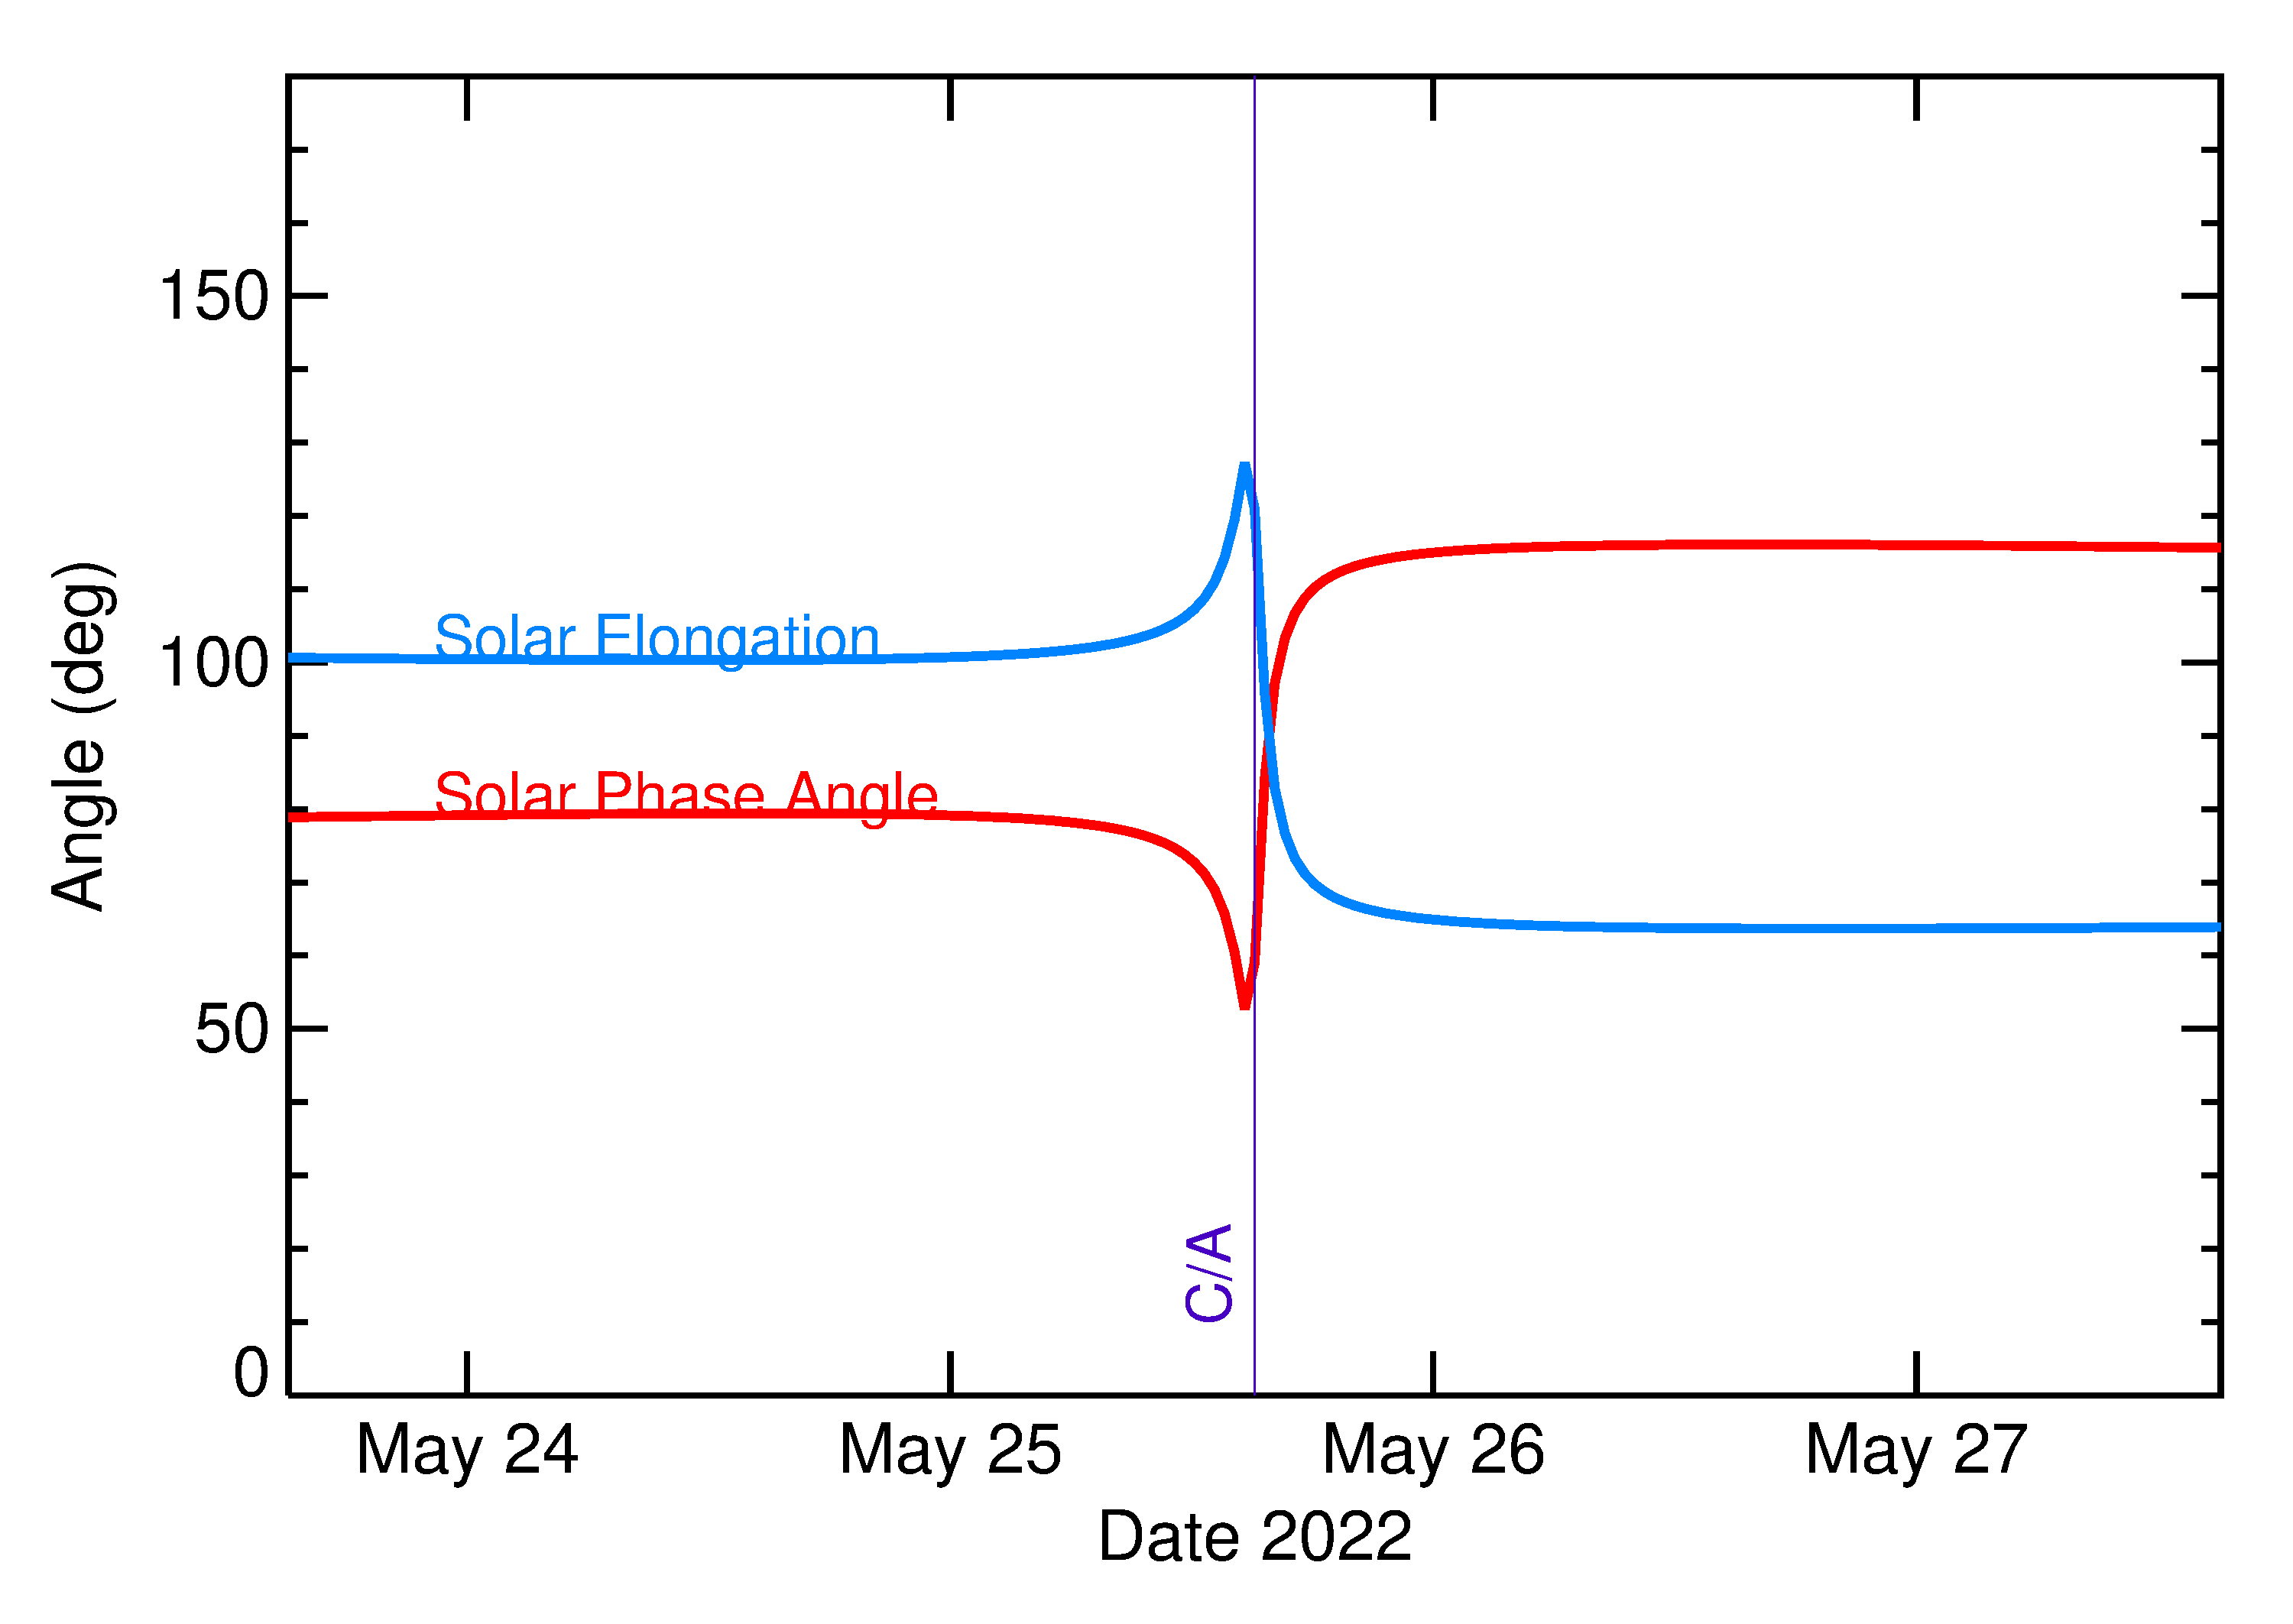 Solar Elongation and Solar Phase Angle of 2022 KP6 in the days around closest approach